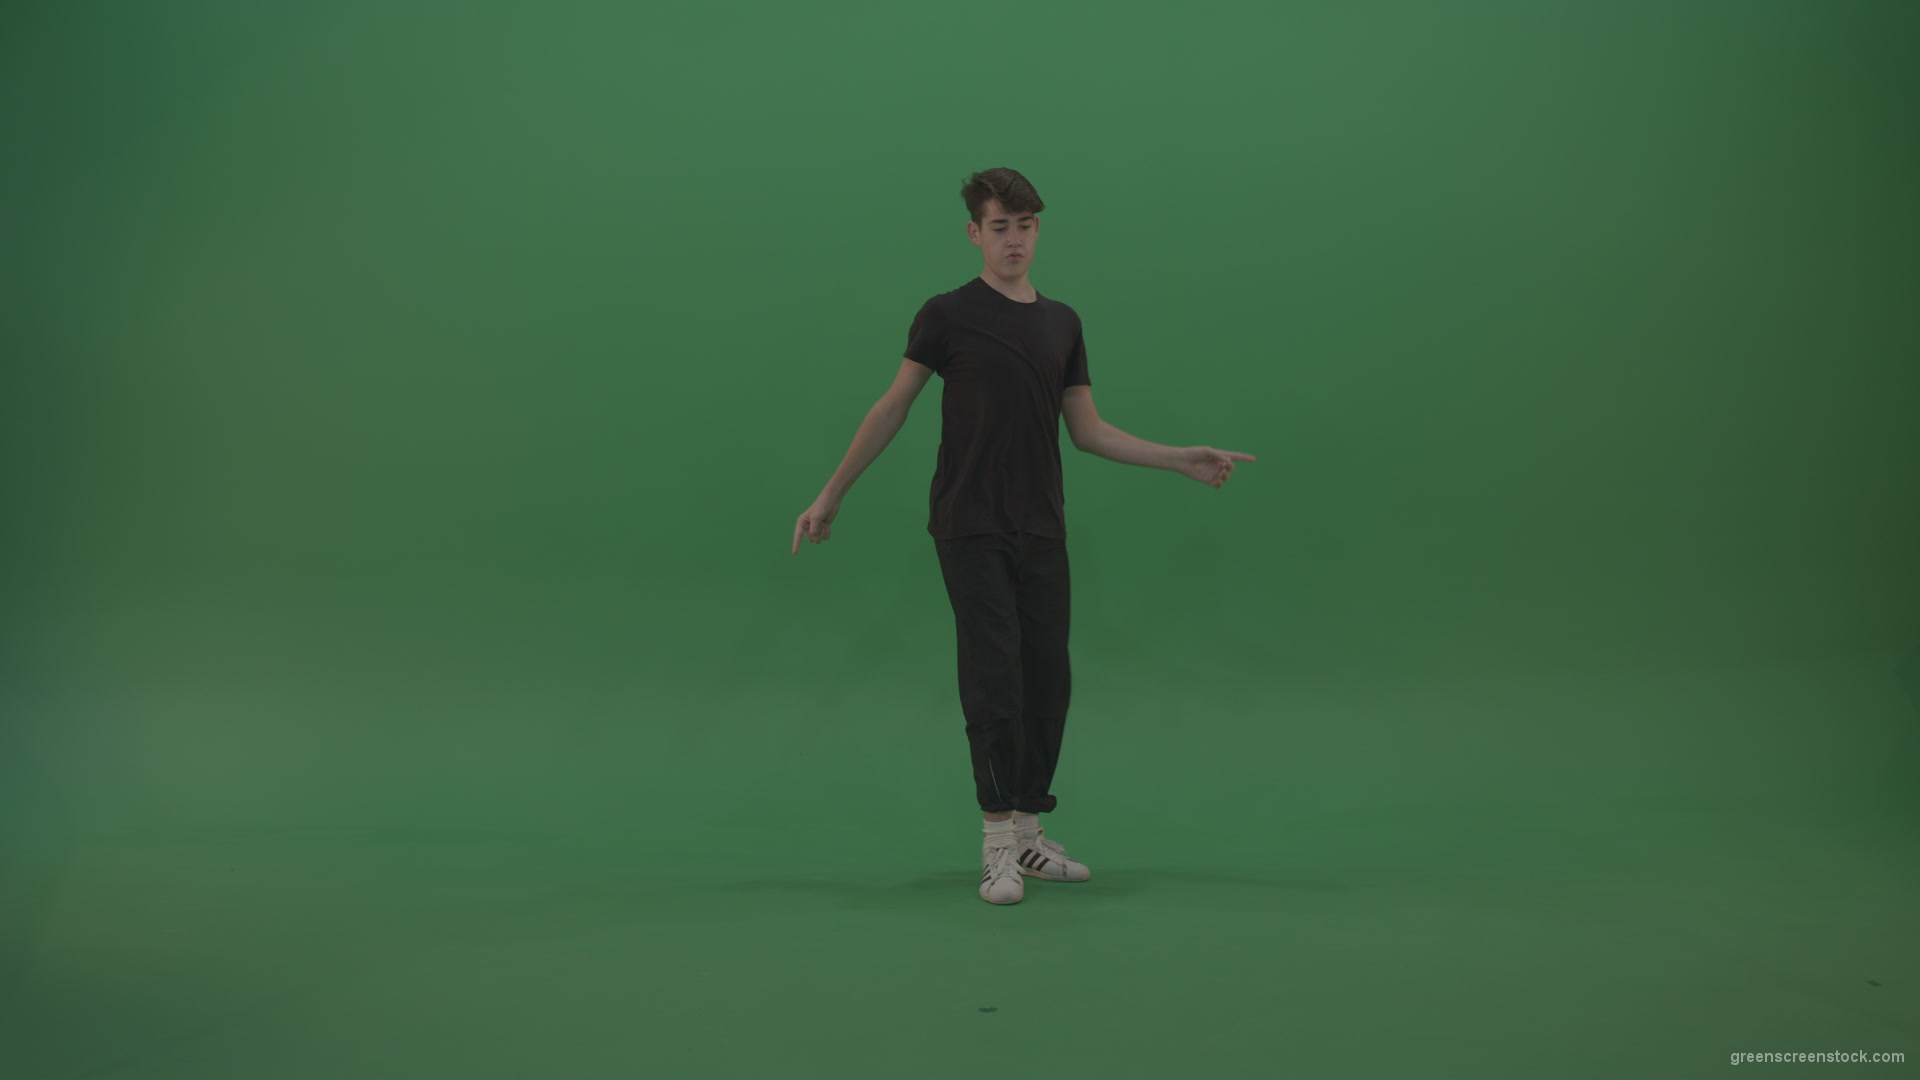 Young_Brunette_Boy_Showing_Awesome_Hip_Hop_Dance_Technical_Skills_With_Robot_Tought_Moves_On_Green_Screen_Chroma_Key_Background_001 Green Screen Stock